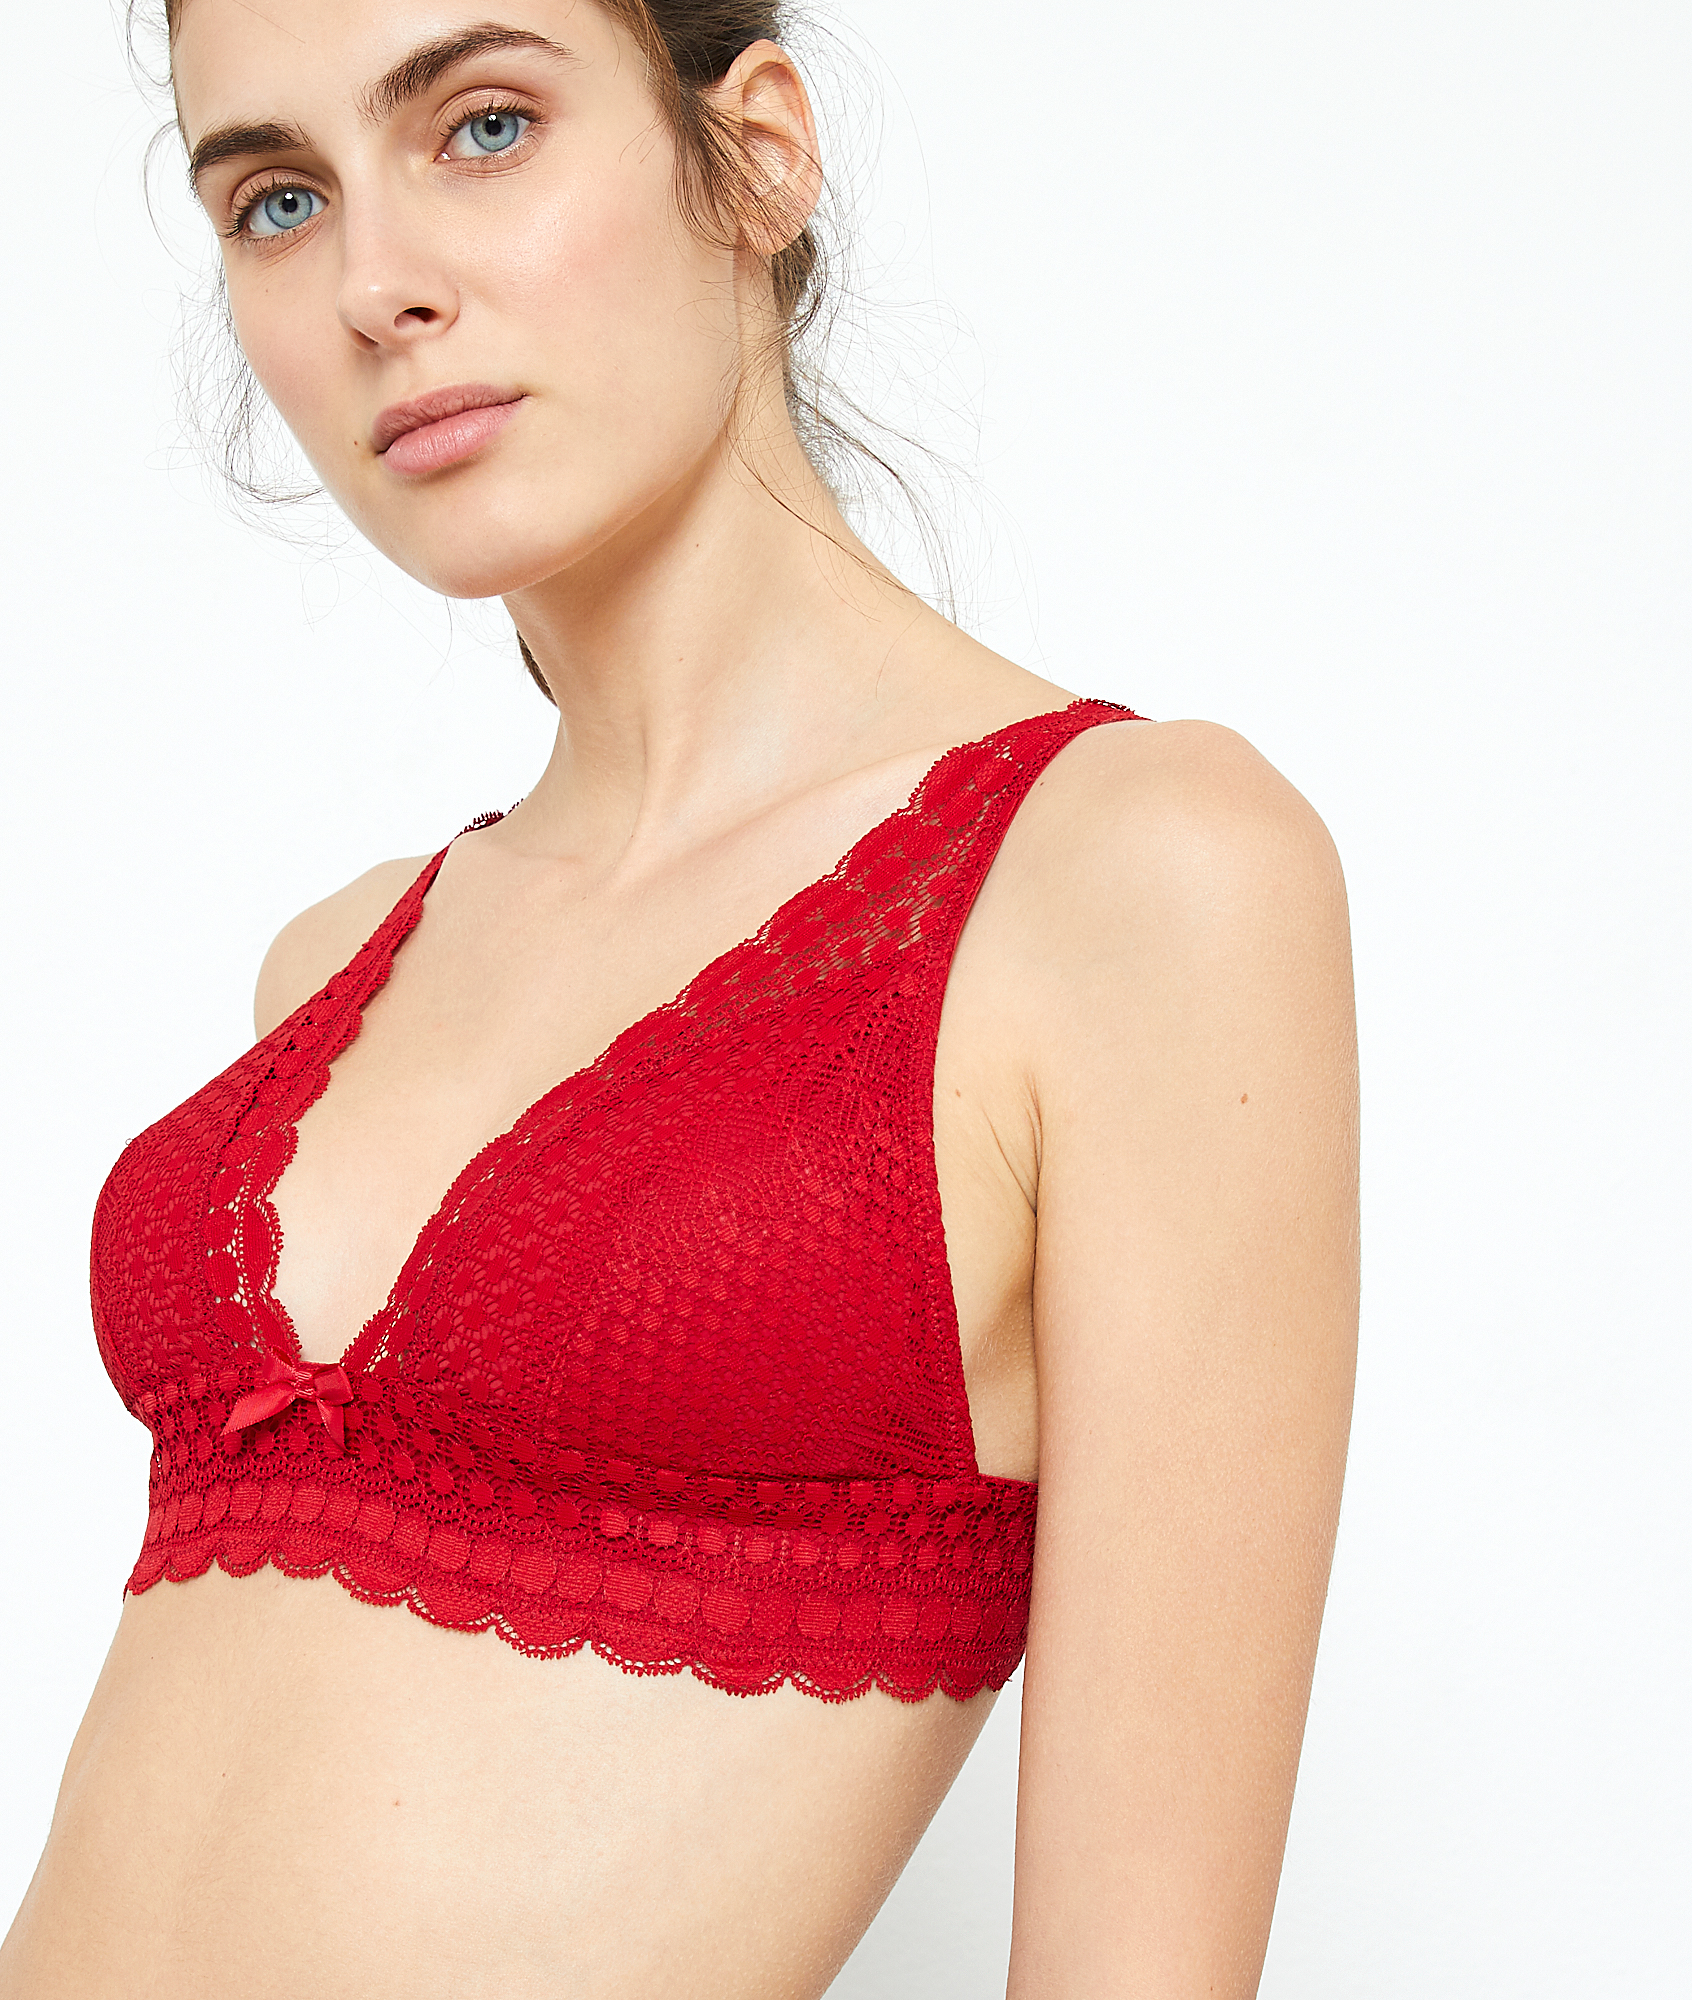 Cherie Recycled Bra N°8 Non-underwired Triangle Bra Red, 54% OFF